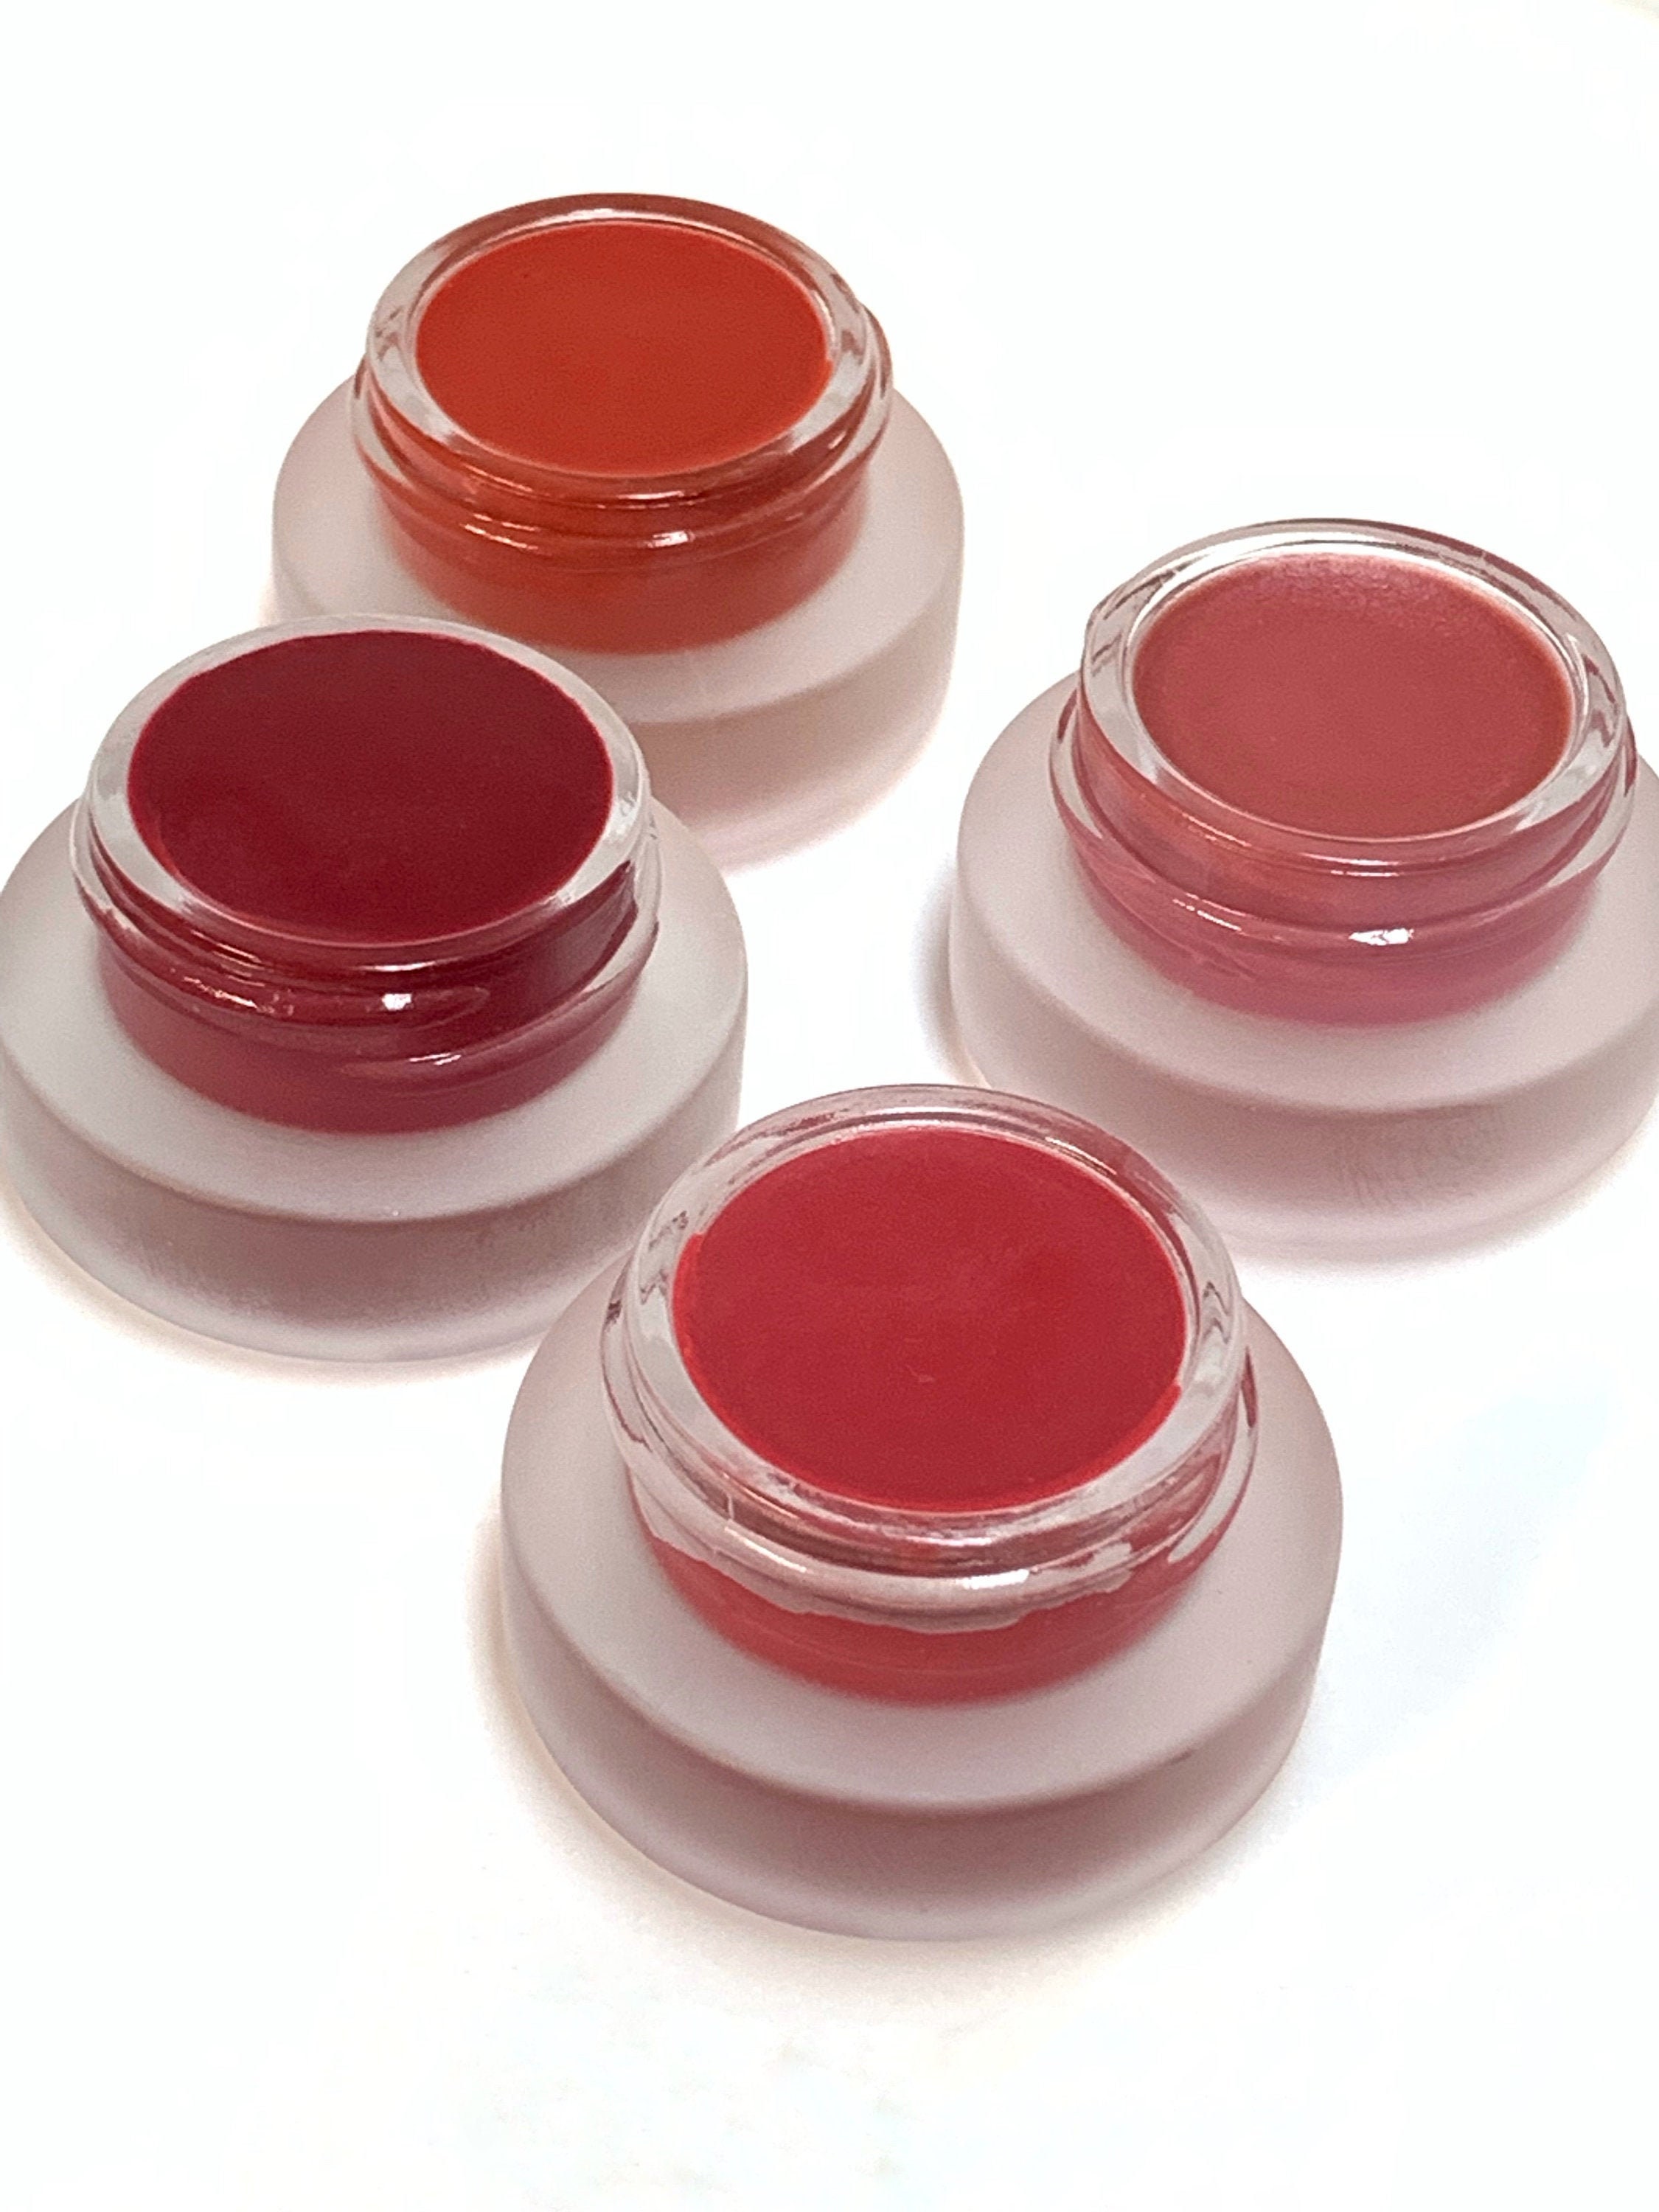 Lip gloss Color Powder Organic Pigment Red China Manufacturer